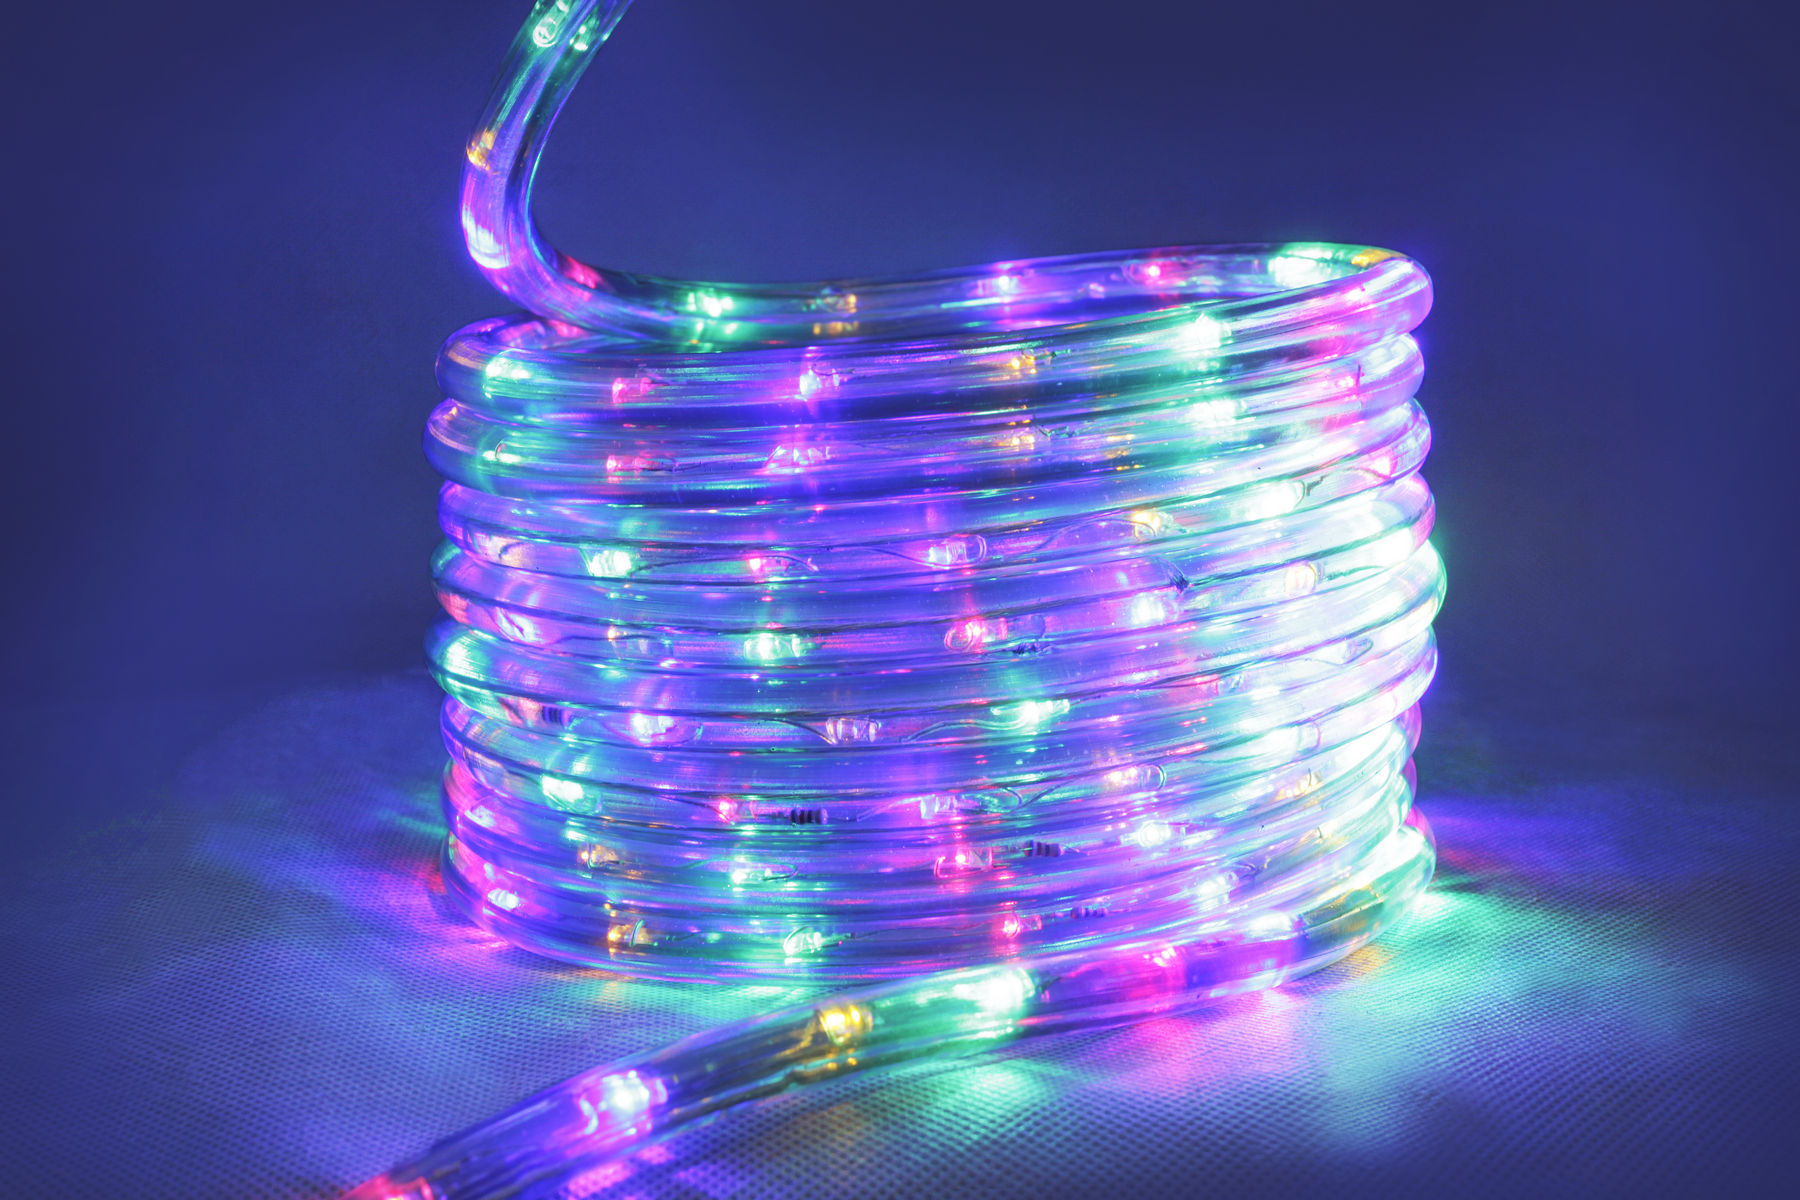 10 Meter Multi Colour Led Rope Light, Multi Color Outdoor Rope Lights